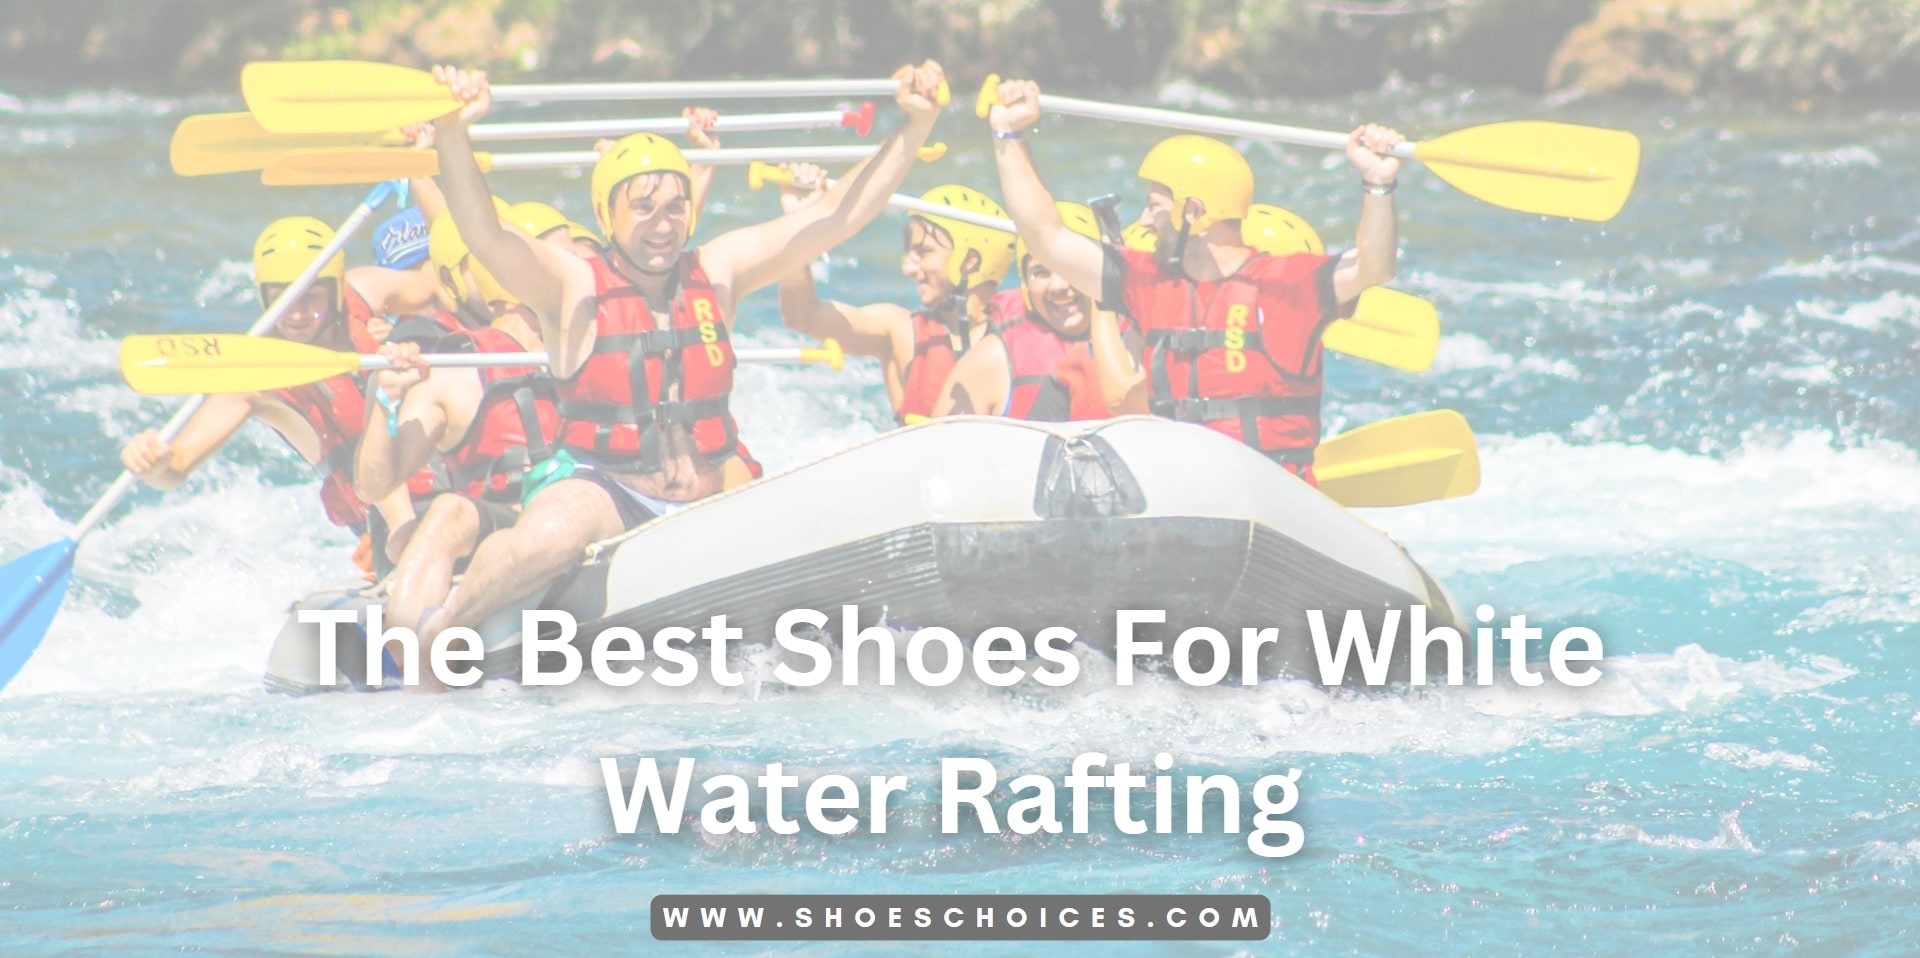 The Best Shoes For White Water Rafting